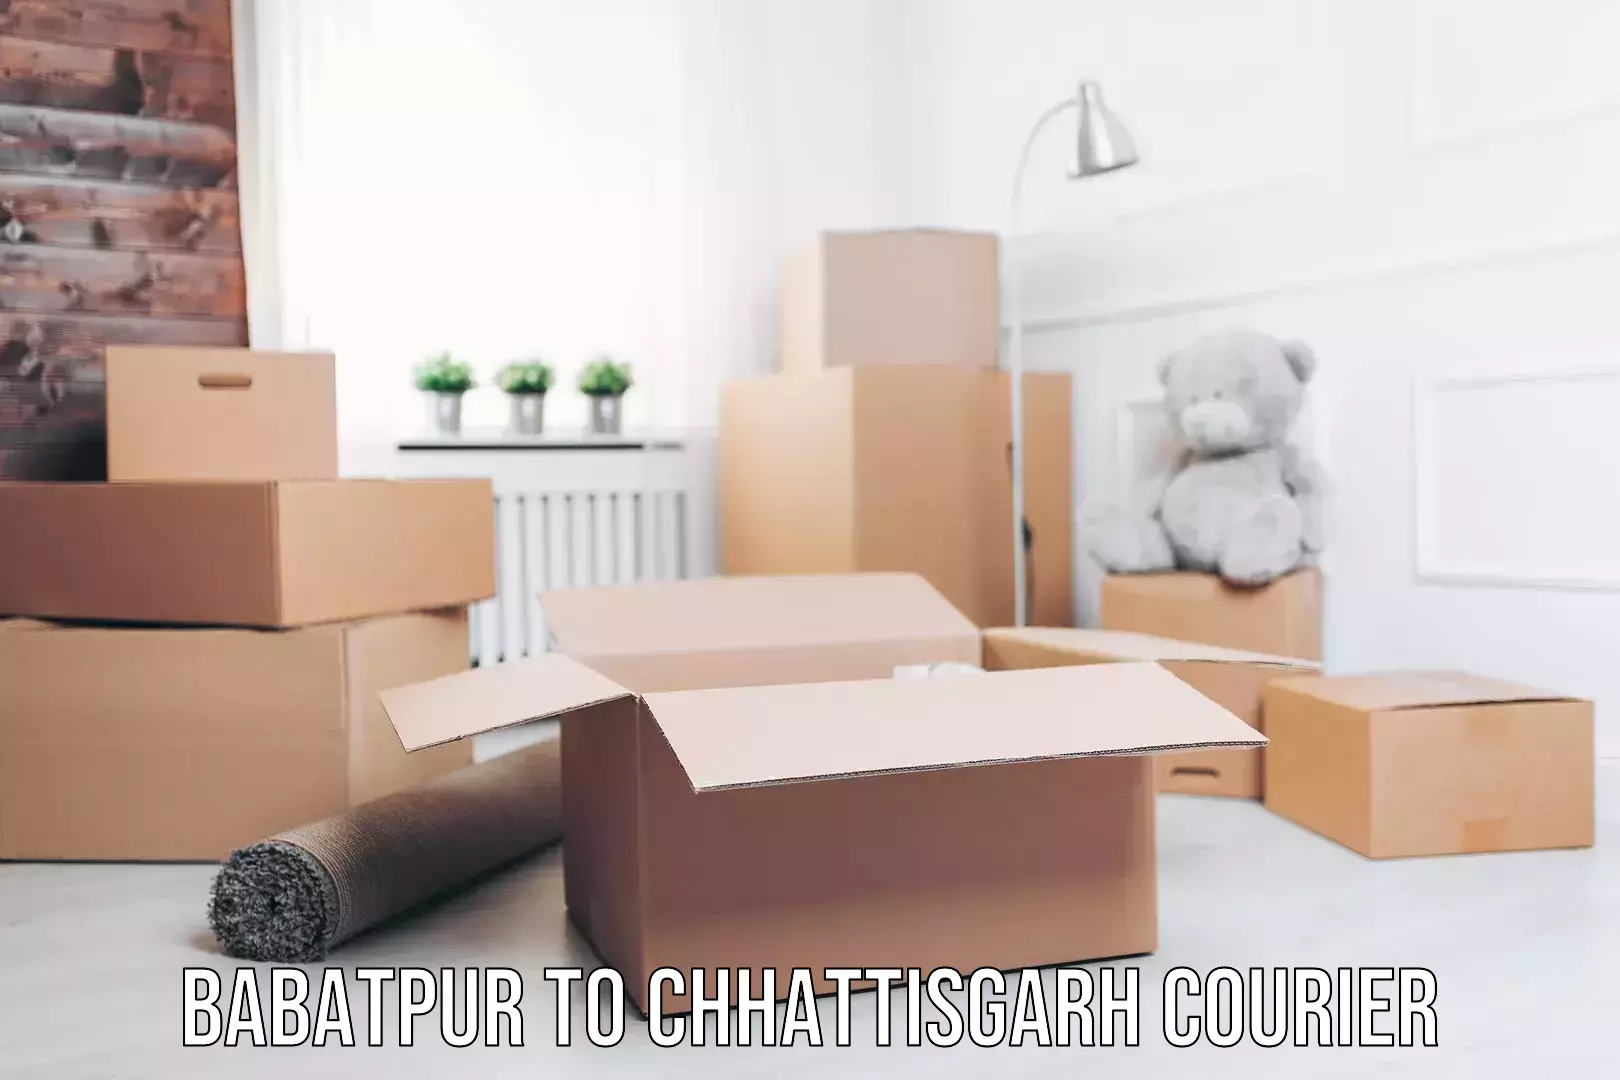 24-hour courier service Babatpur to Chhattisgarh